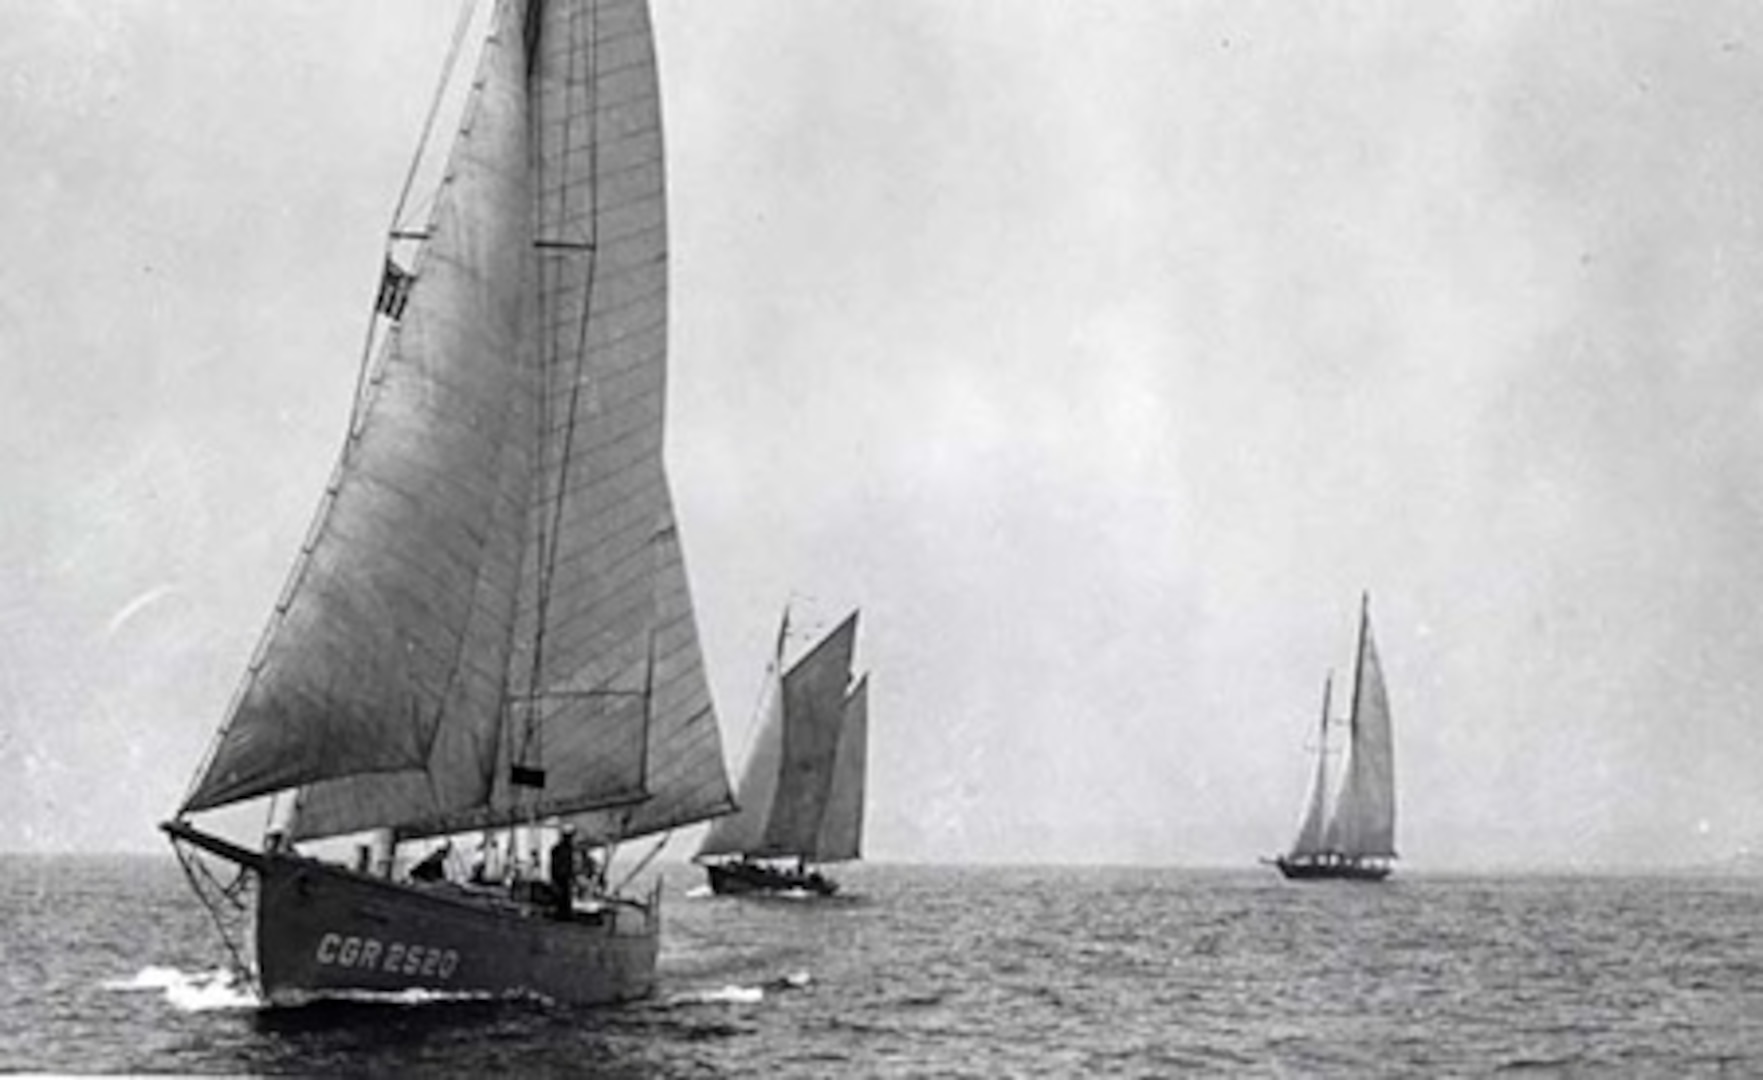 The 52-foot Corsair Fleet schooner, CGR-2520, patrolling off the coast of Massachusetts. (National Archives and Records Administration)